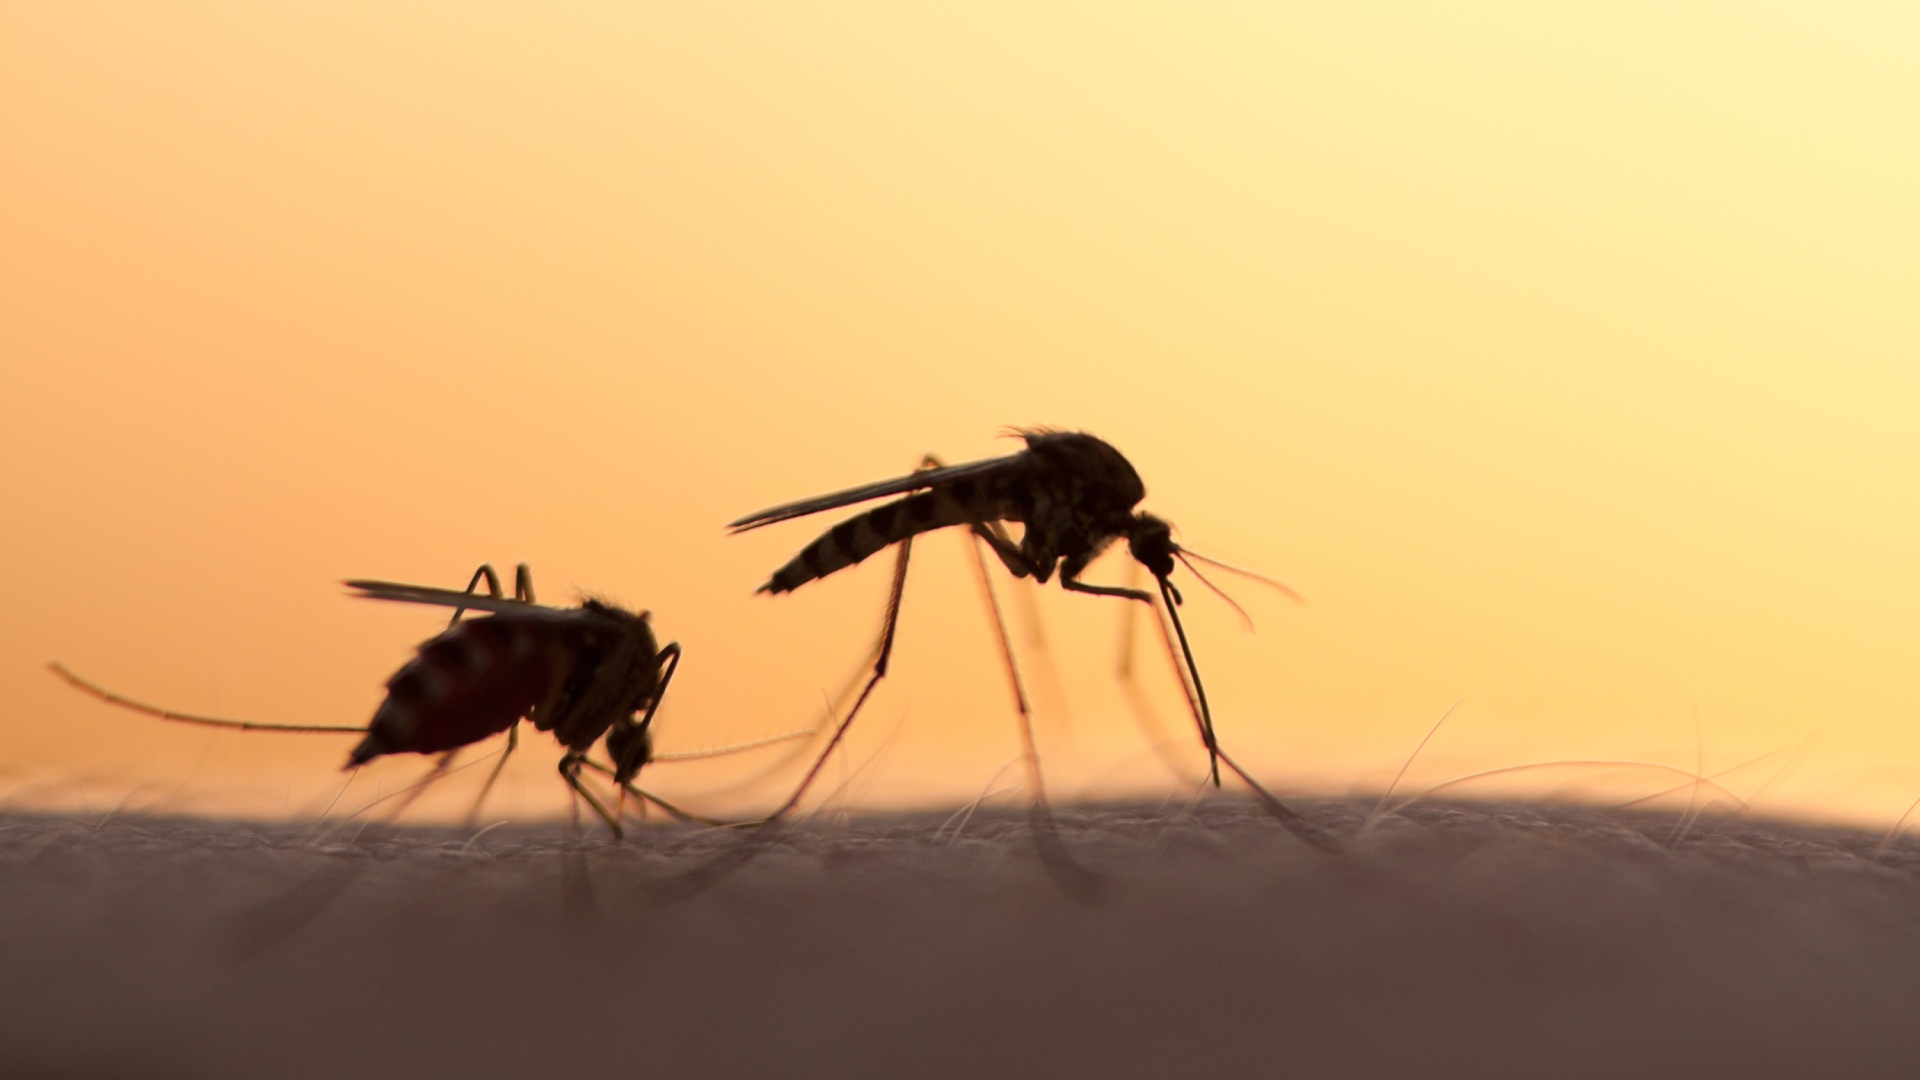 Mosquito Season in Texas Is Here - What Should You Do?